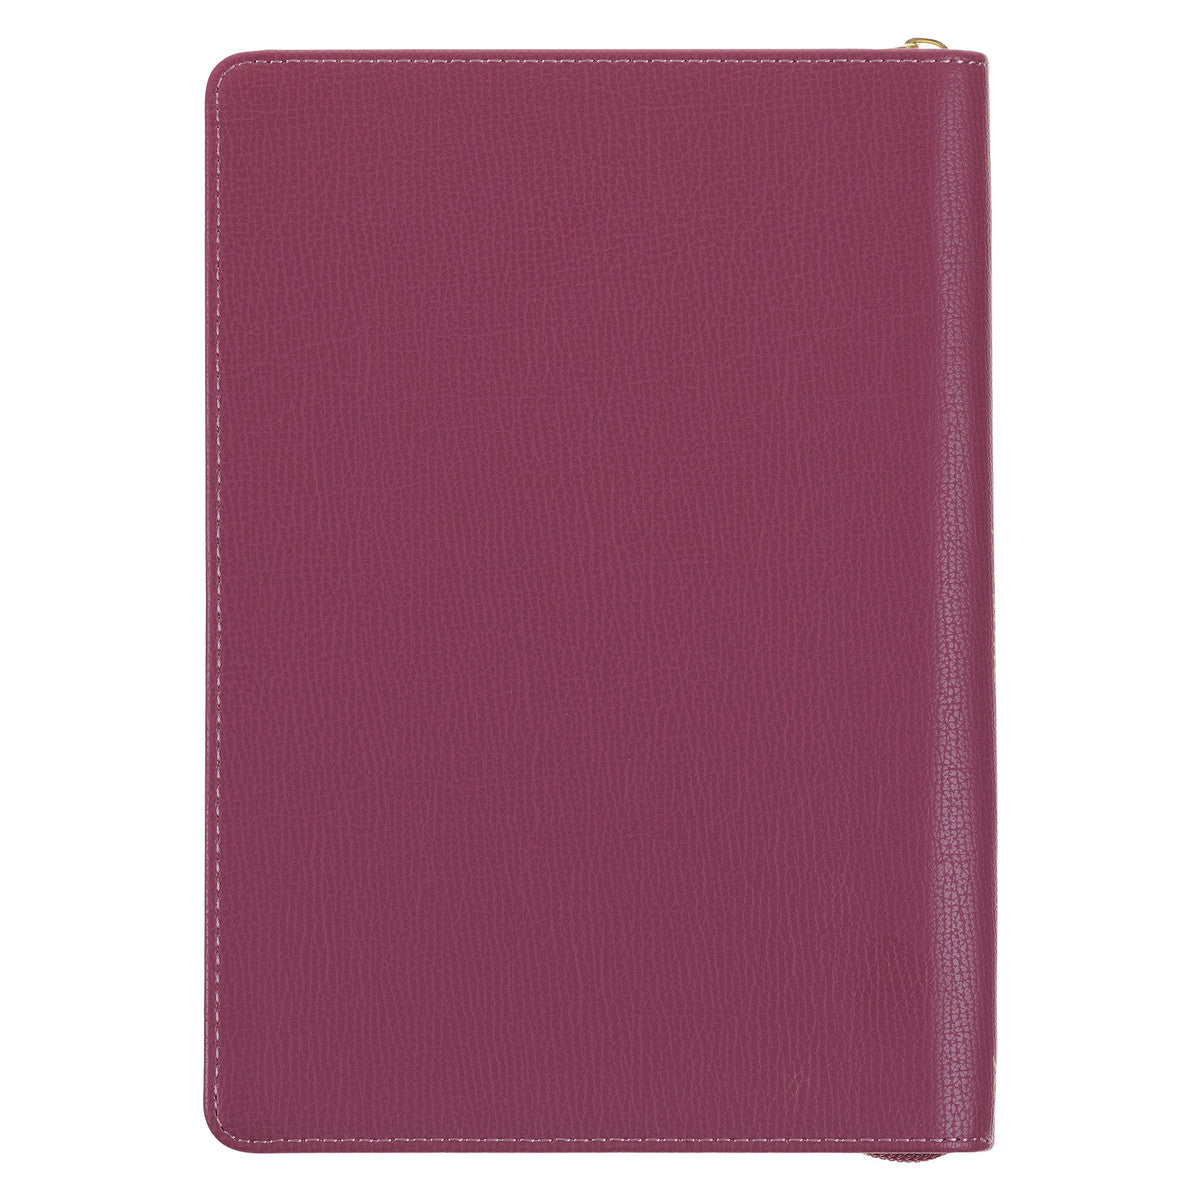 Strong and Courageous Topaz Pink Faux Leather Journal with Zipper Closure - Joshua 1:9 - The Christian Gift Company